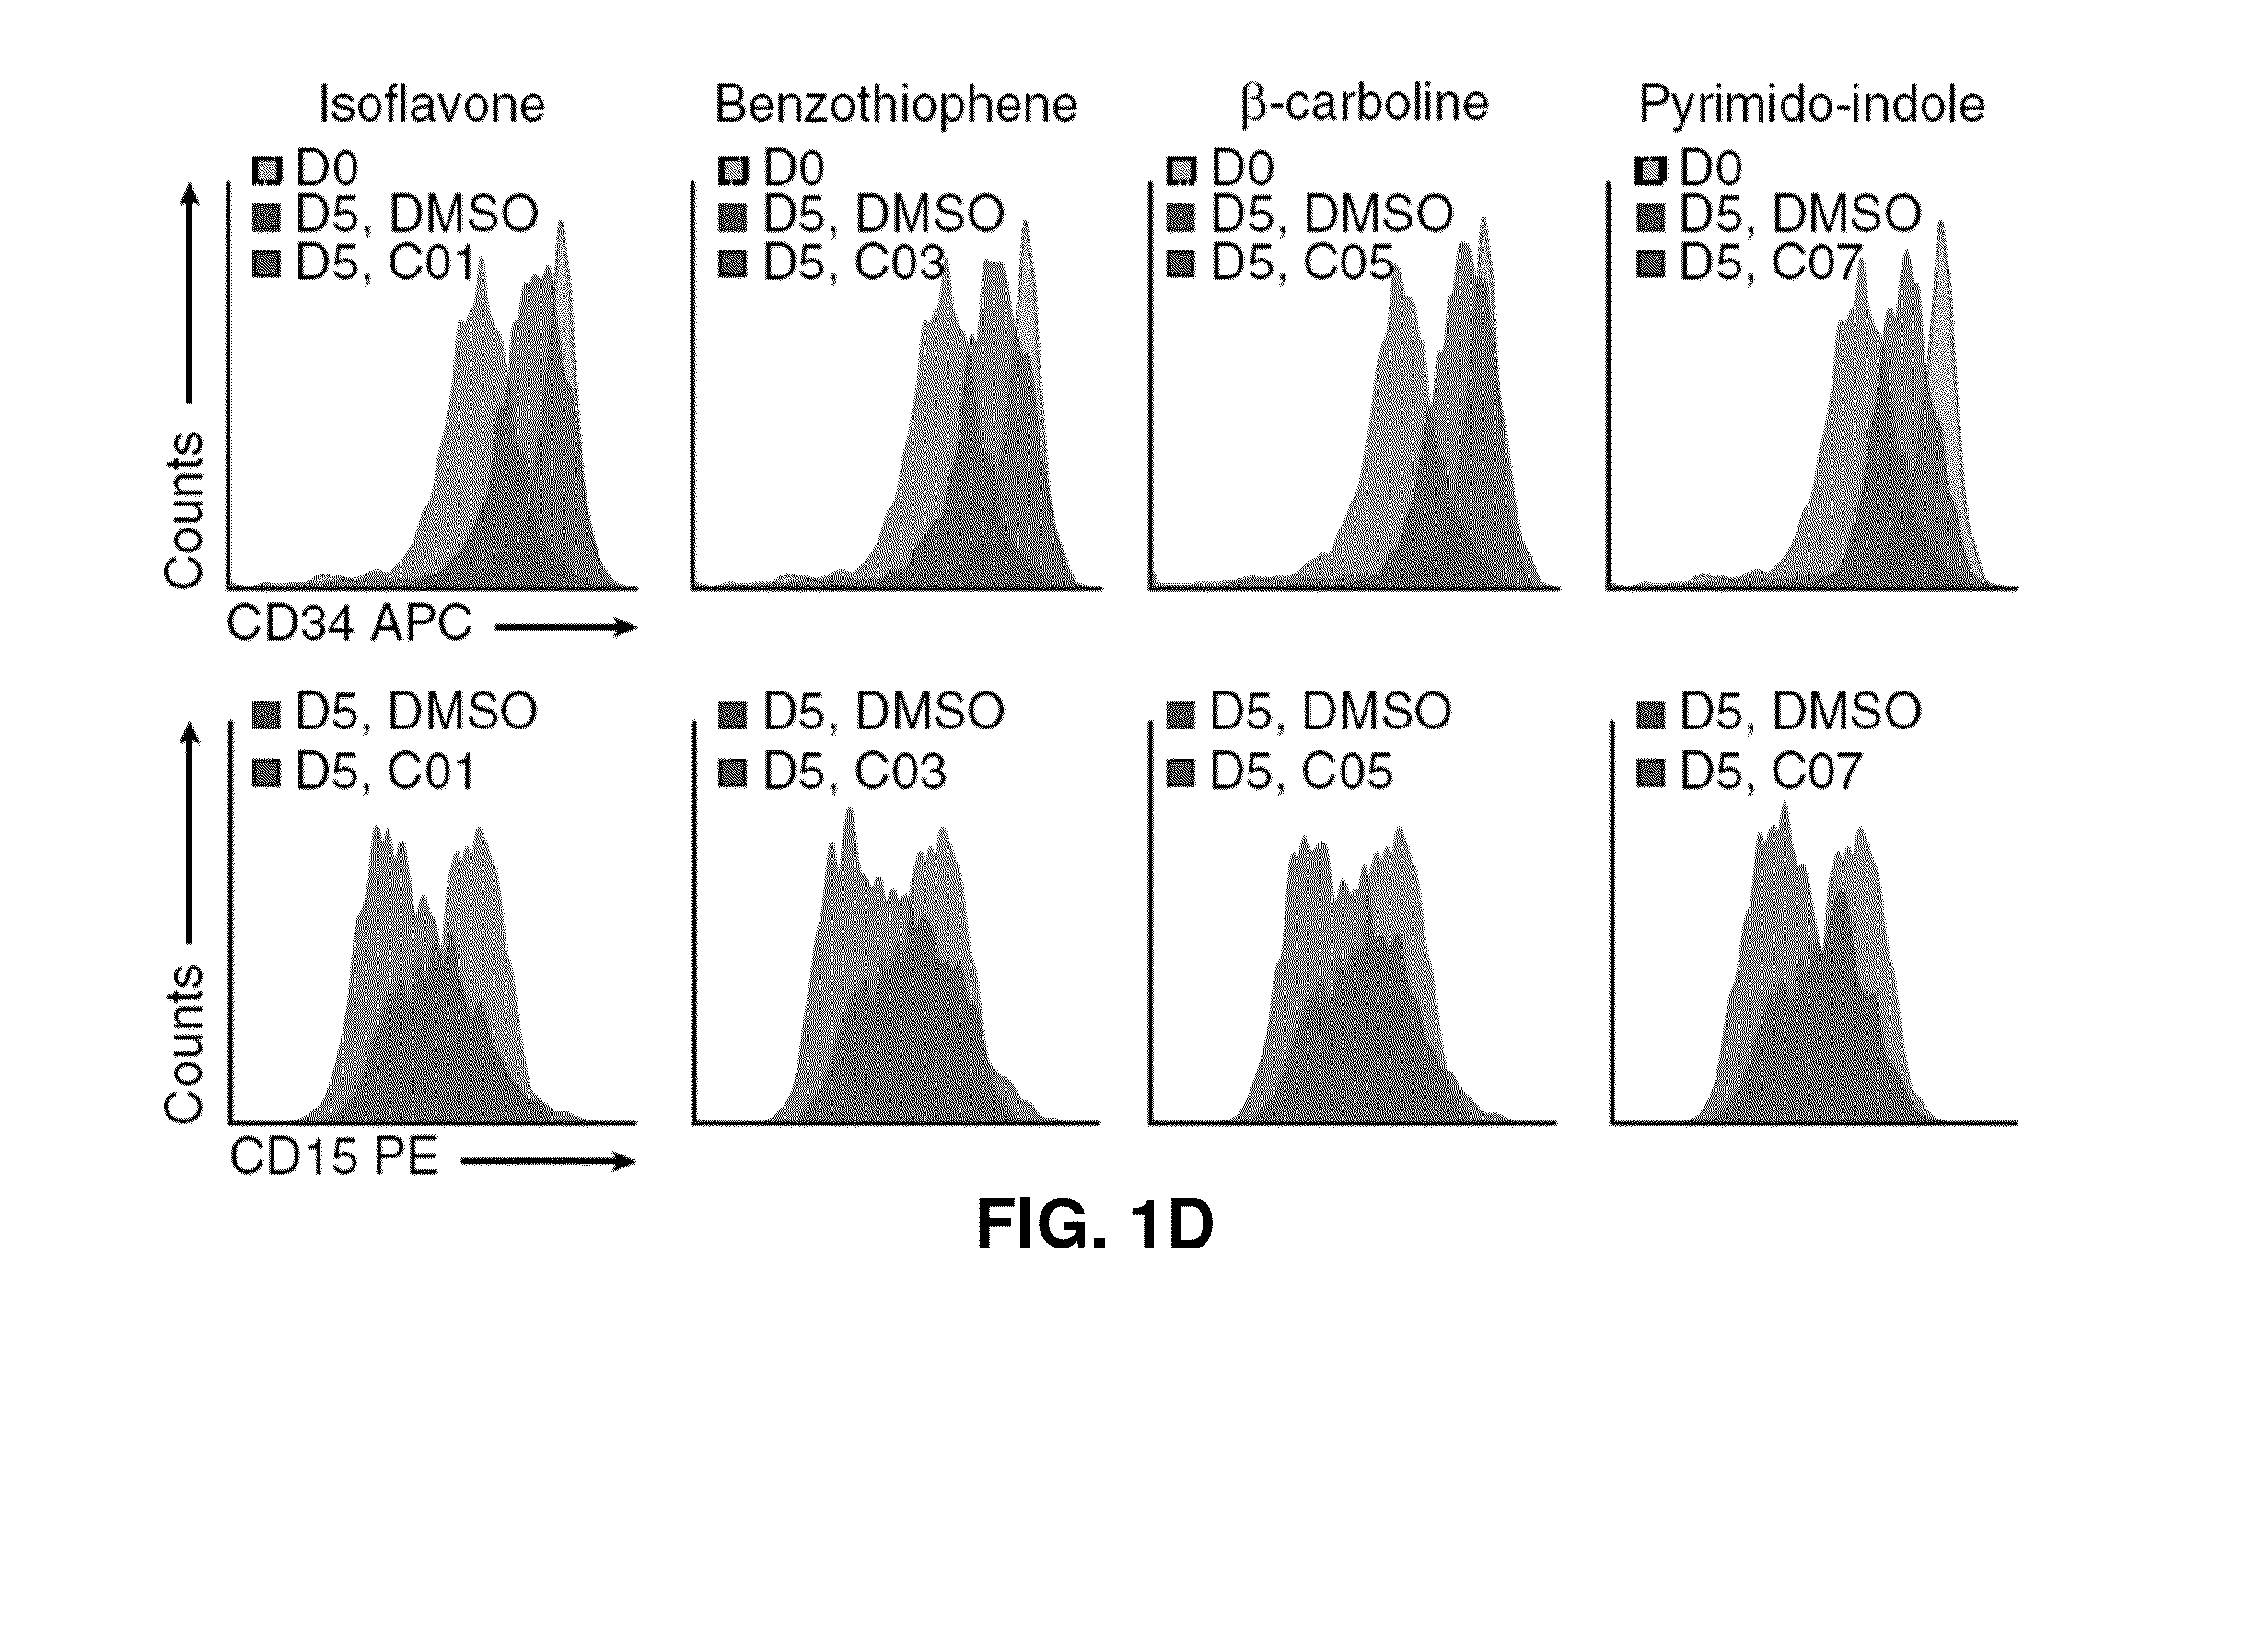 Methods to modulate acute myeloid leukemia stem/progenitor cell expansion and/or differentiation